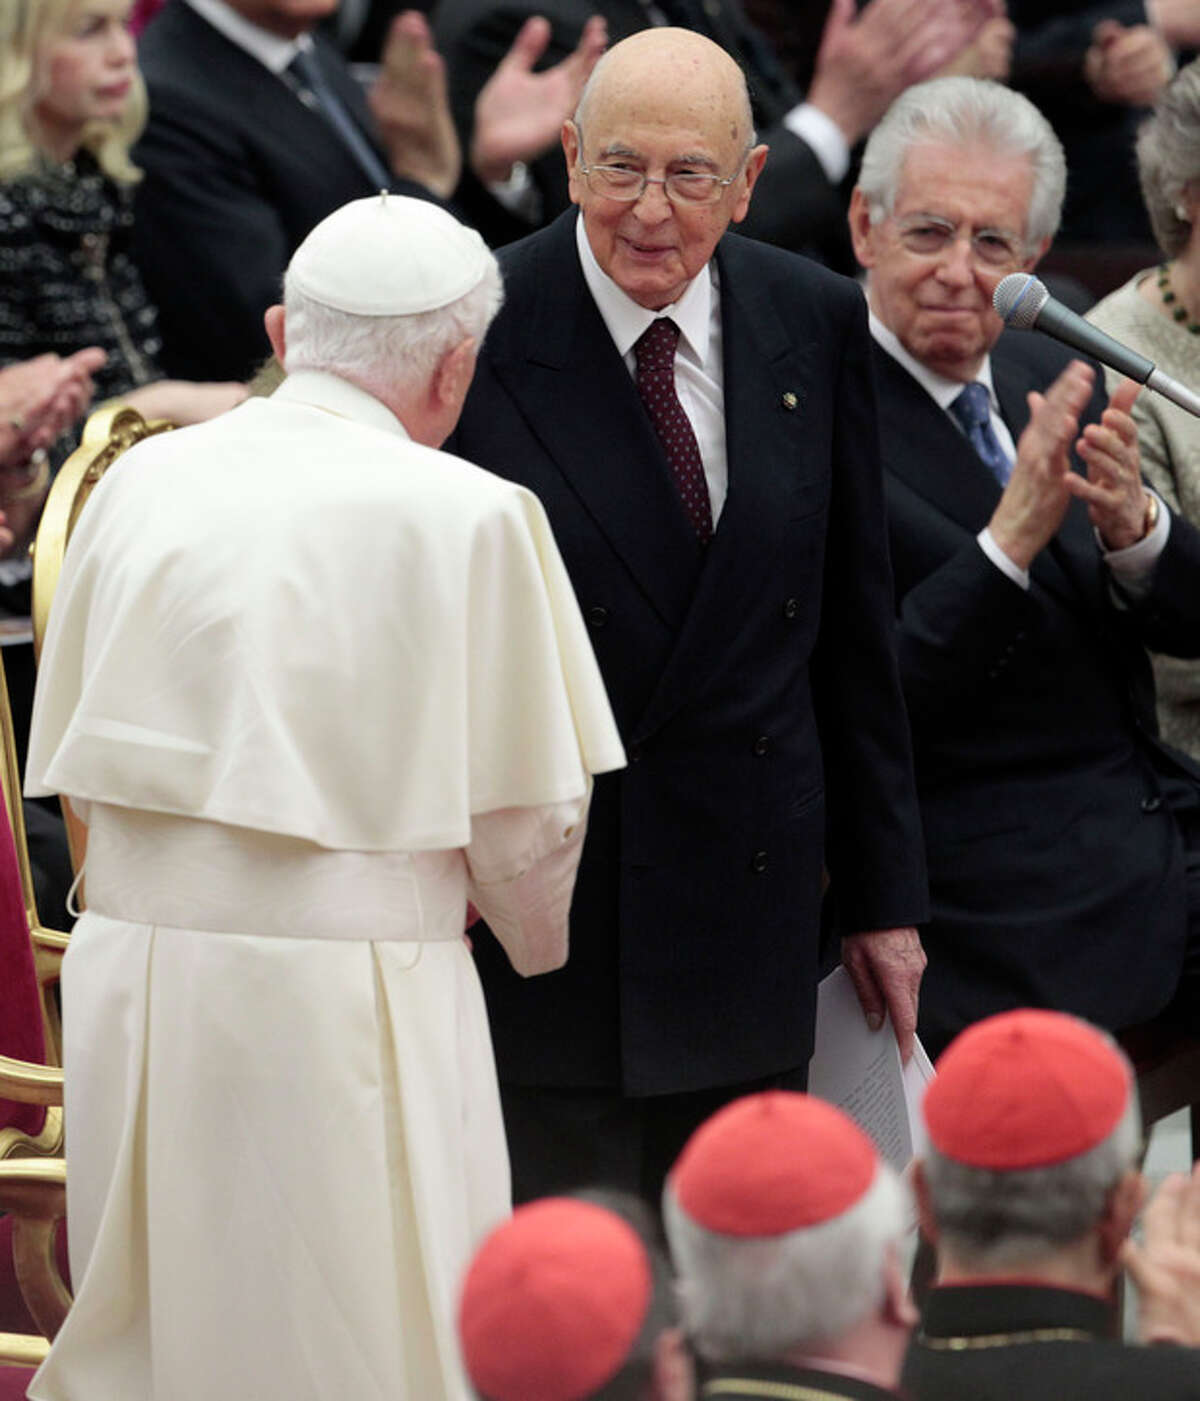 Pope Benedict XVI greets Italian President Giorgio Napolitano as they wait for the start a concert offered by Italian President to celebrate his Pontificate at the Vatican, Friday, May 11, 2012. (AP Photo/Gregorio Borgia)